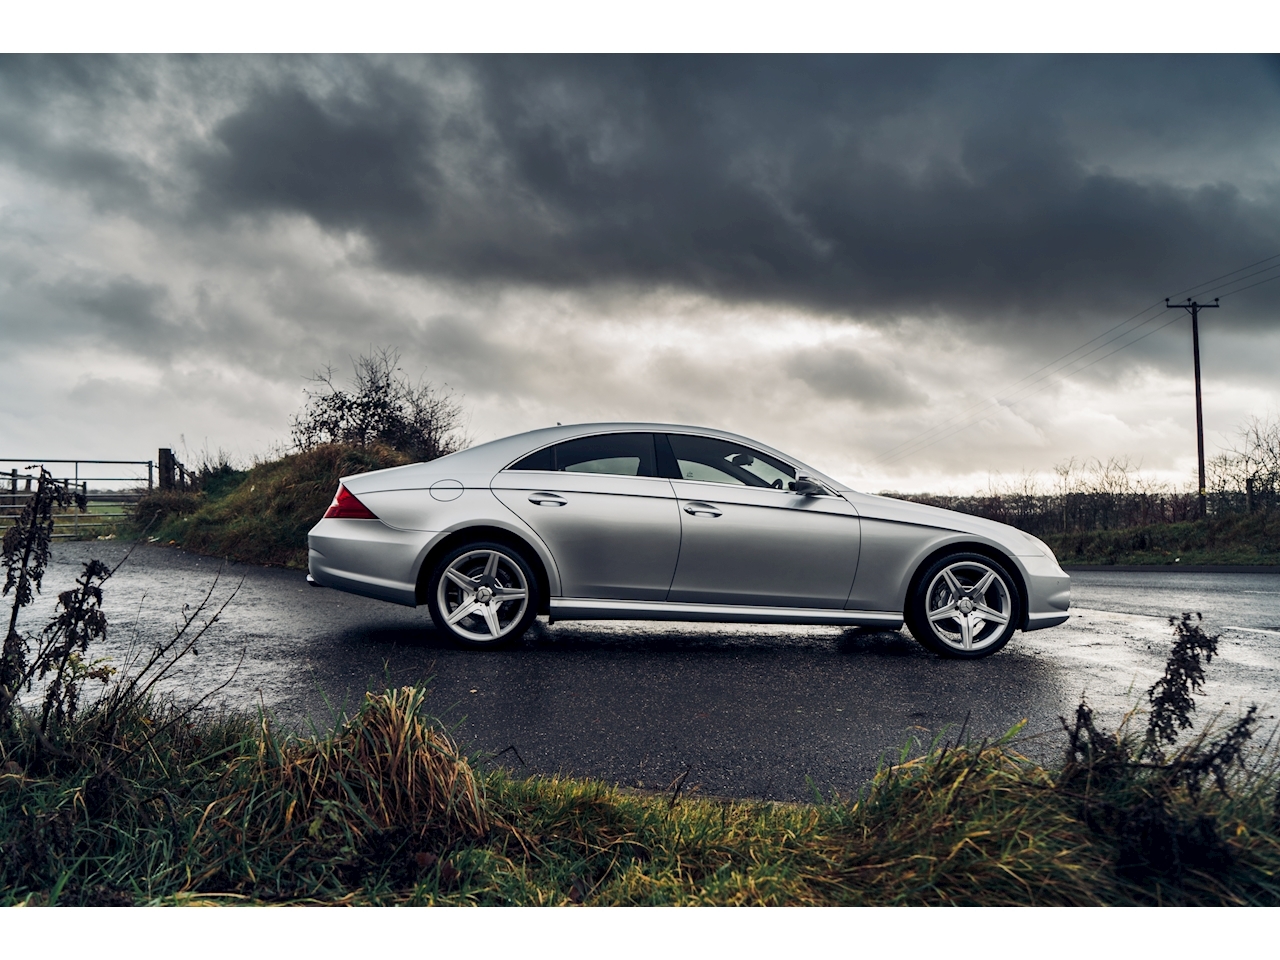 Mercedes Cls Cls320 Cdi Coupe 3.0 Automatic Diesel